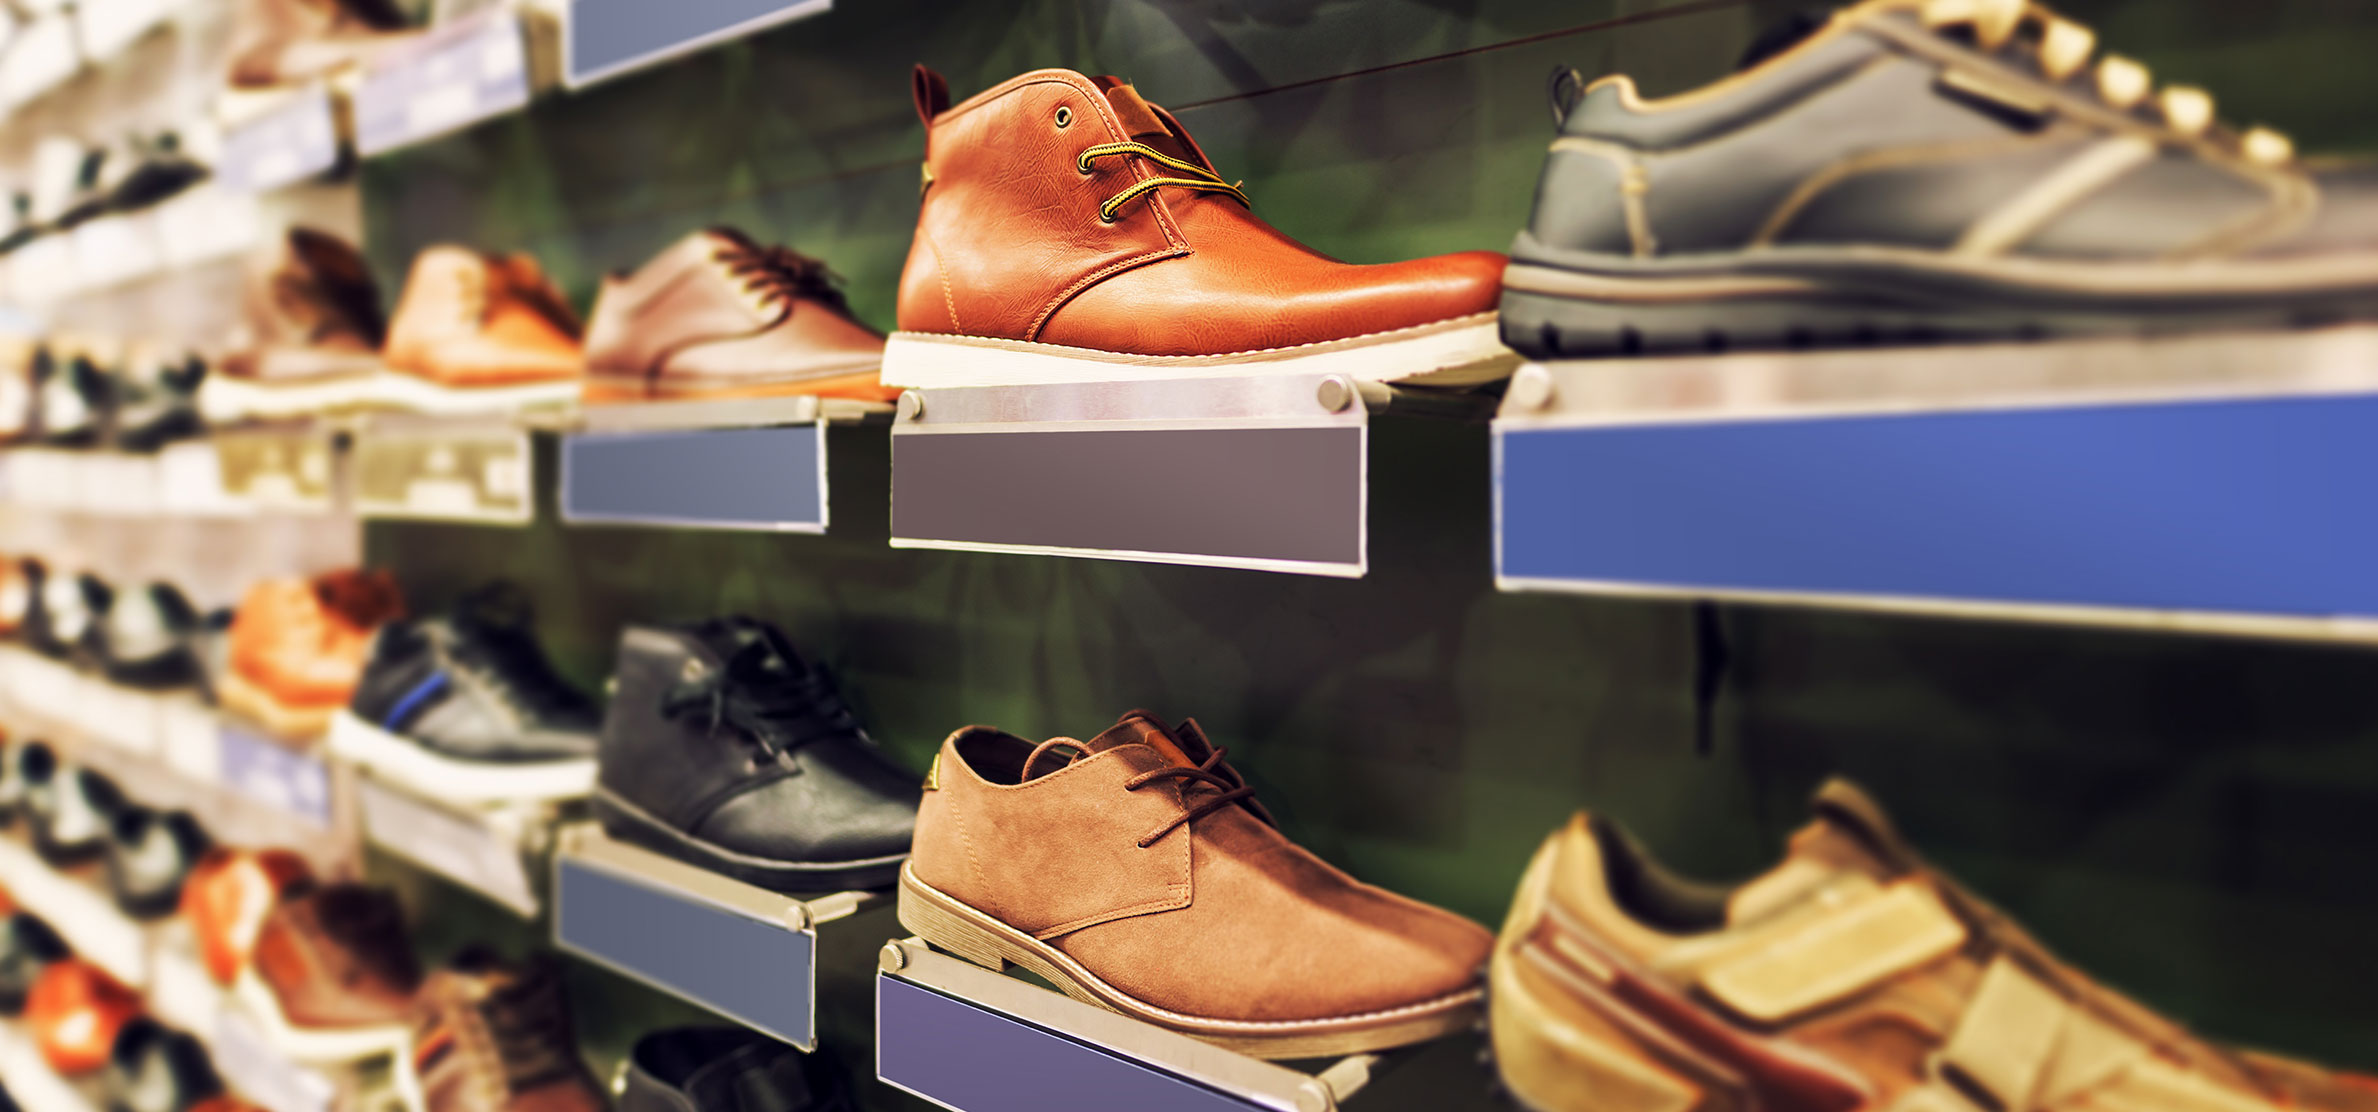 Celerant Integration with Magento for Footwear